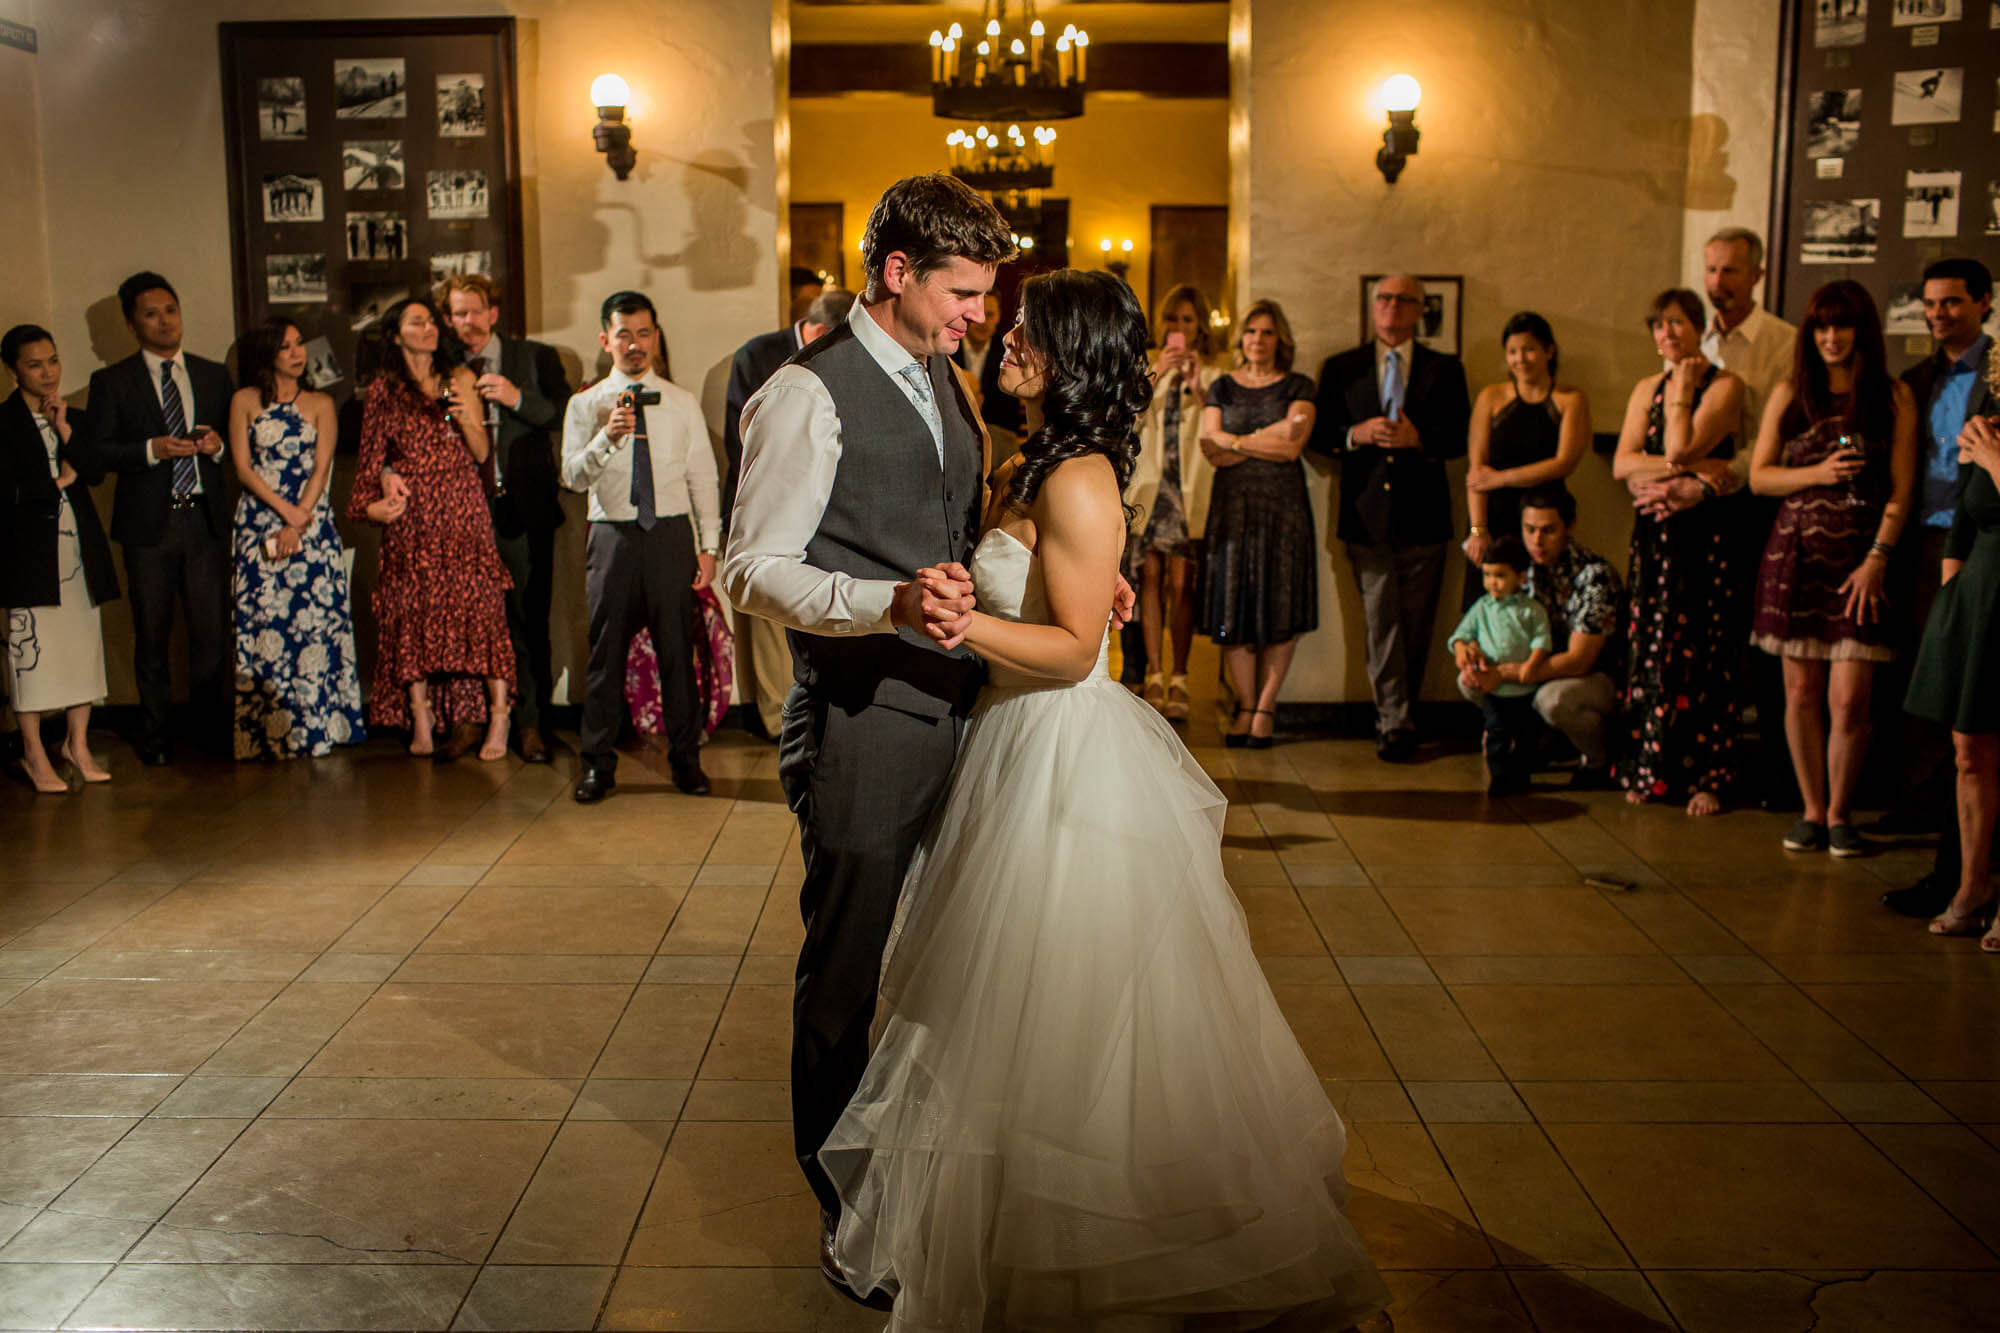 Bride and groom's first dance in the Winter Club Room at the Majestic Yosemite Hotel